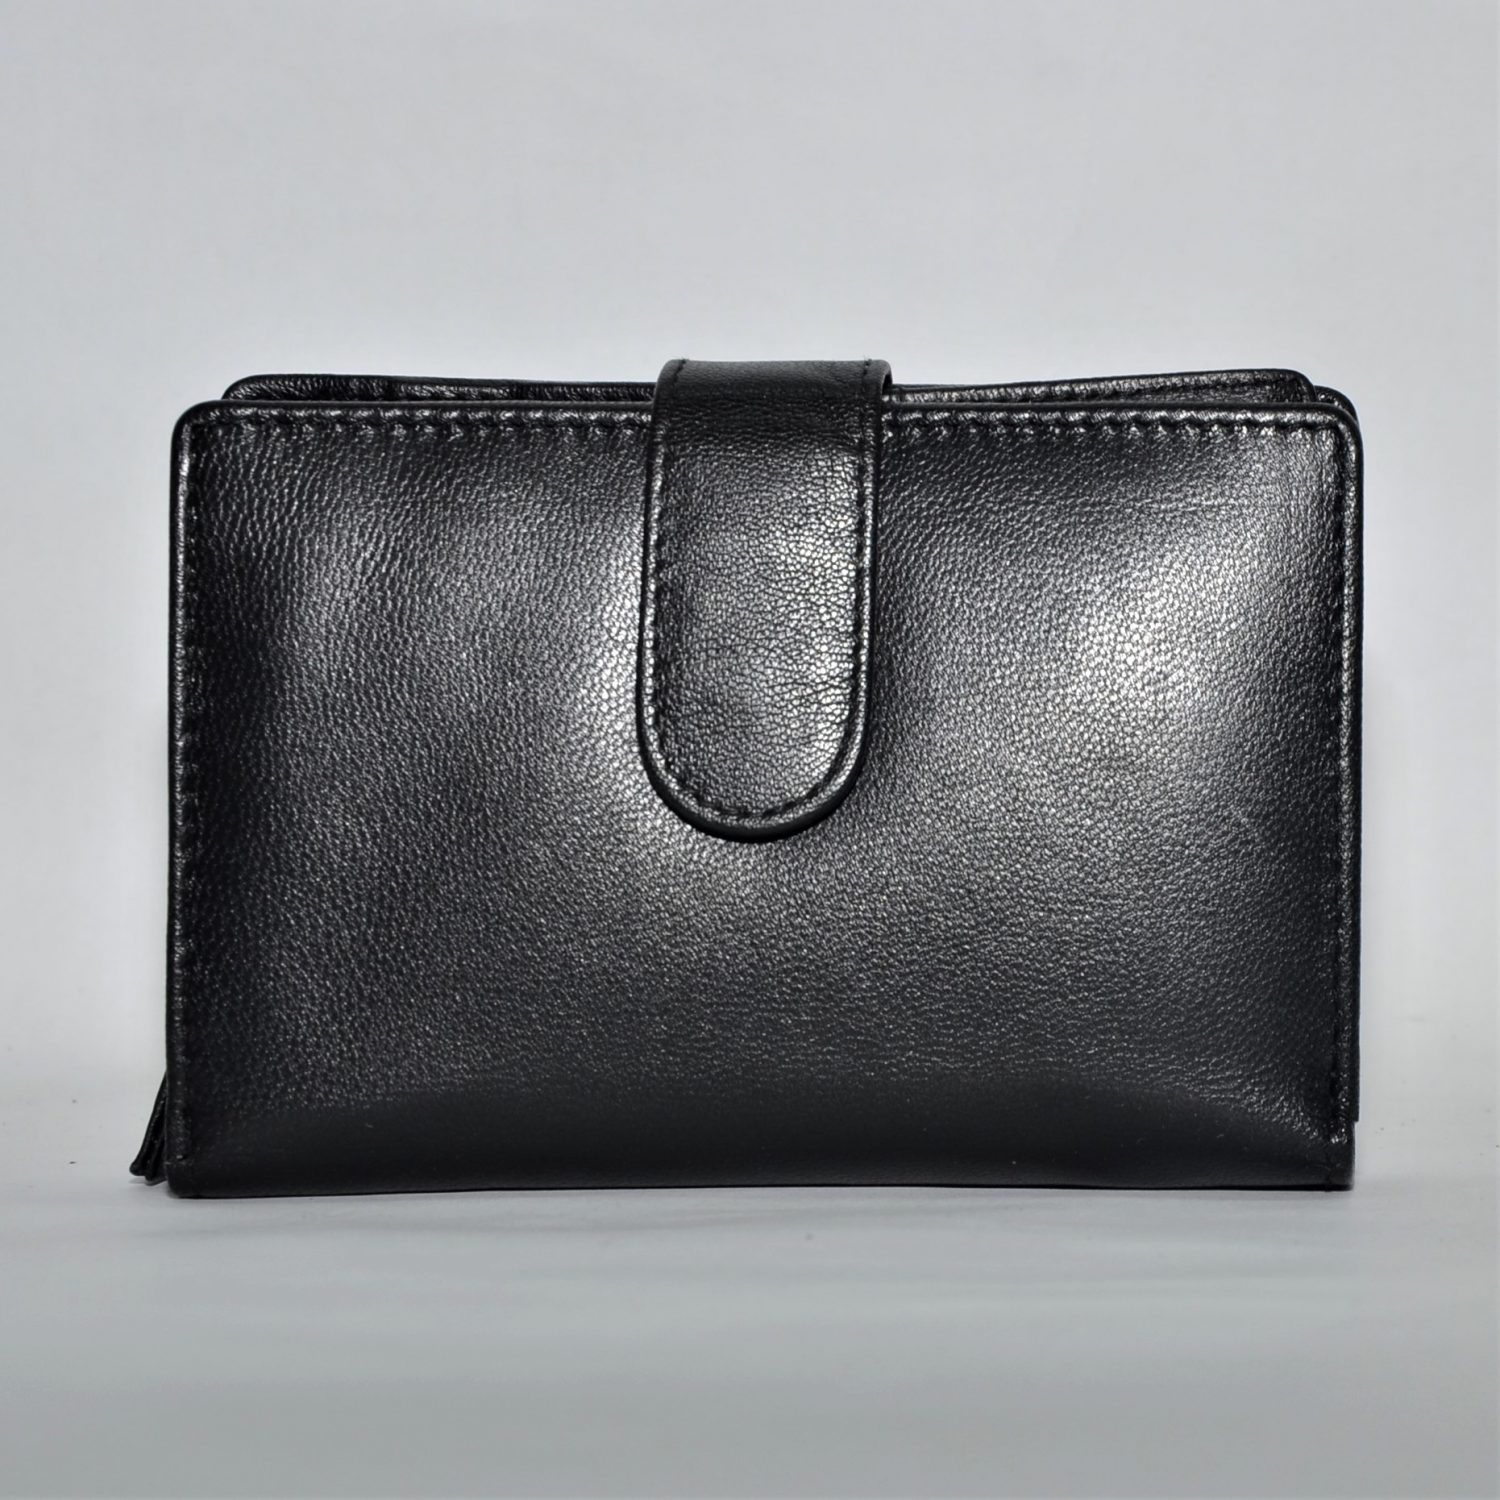 Primehide Leather RFID Purse - Style No. 2812 - OJP Products